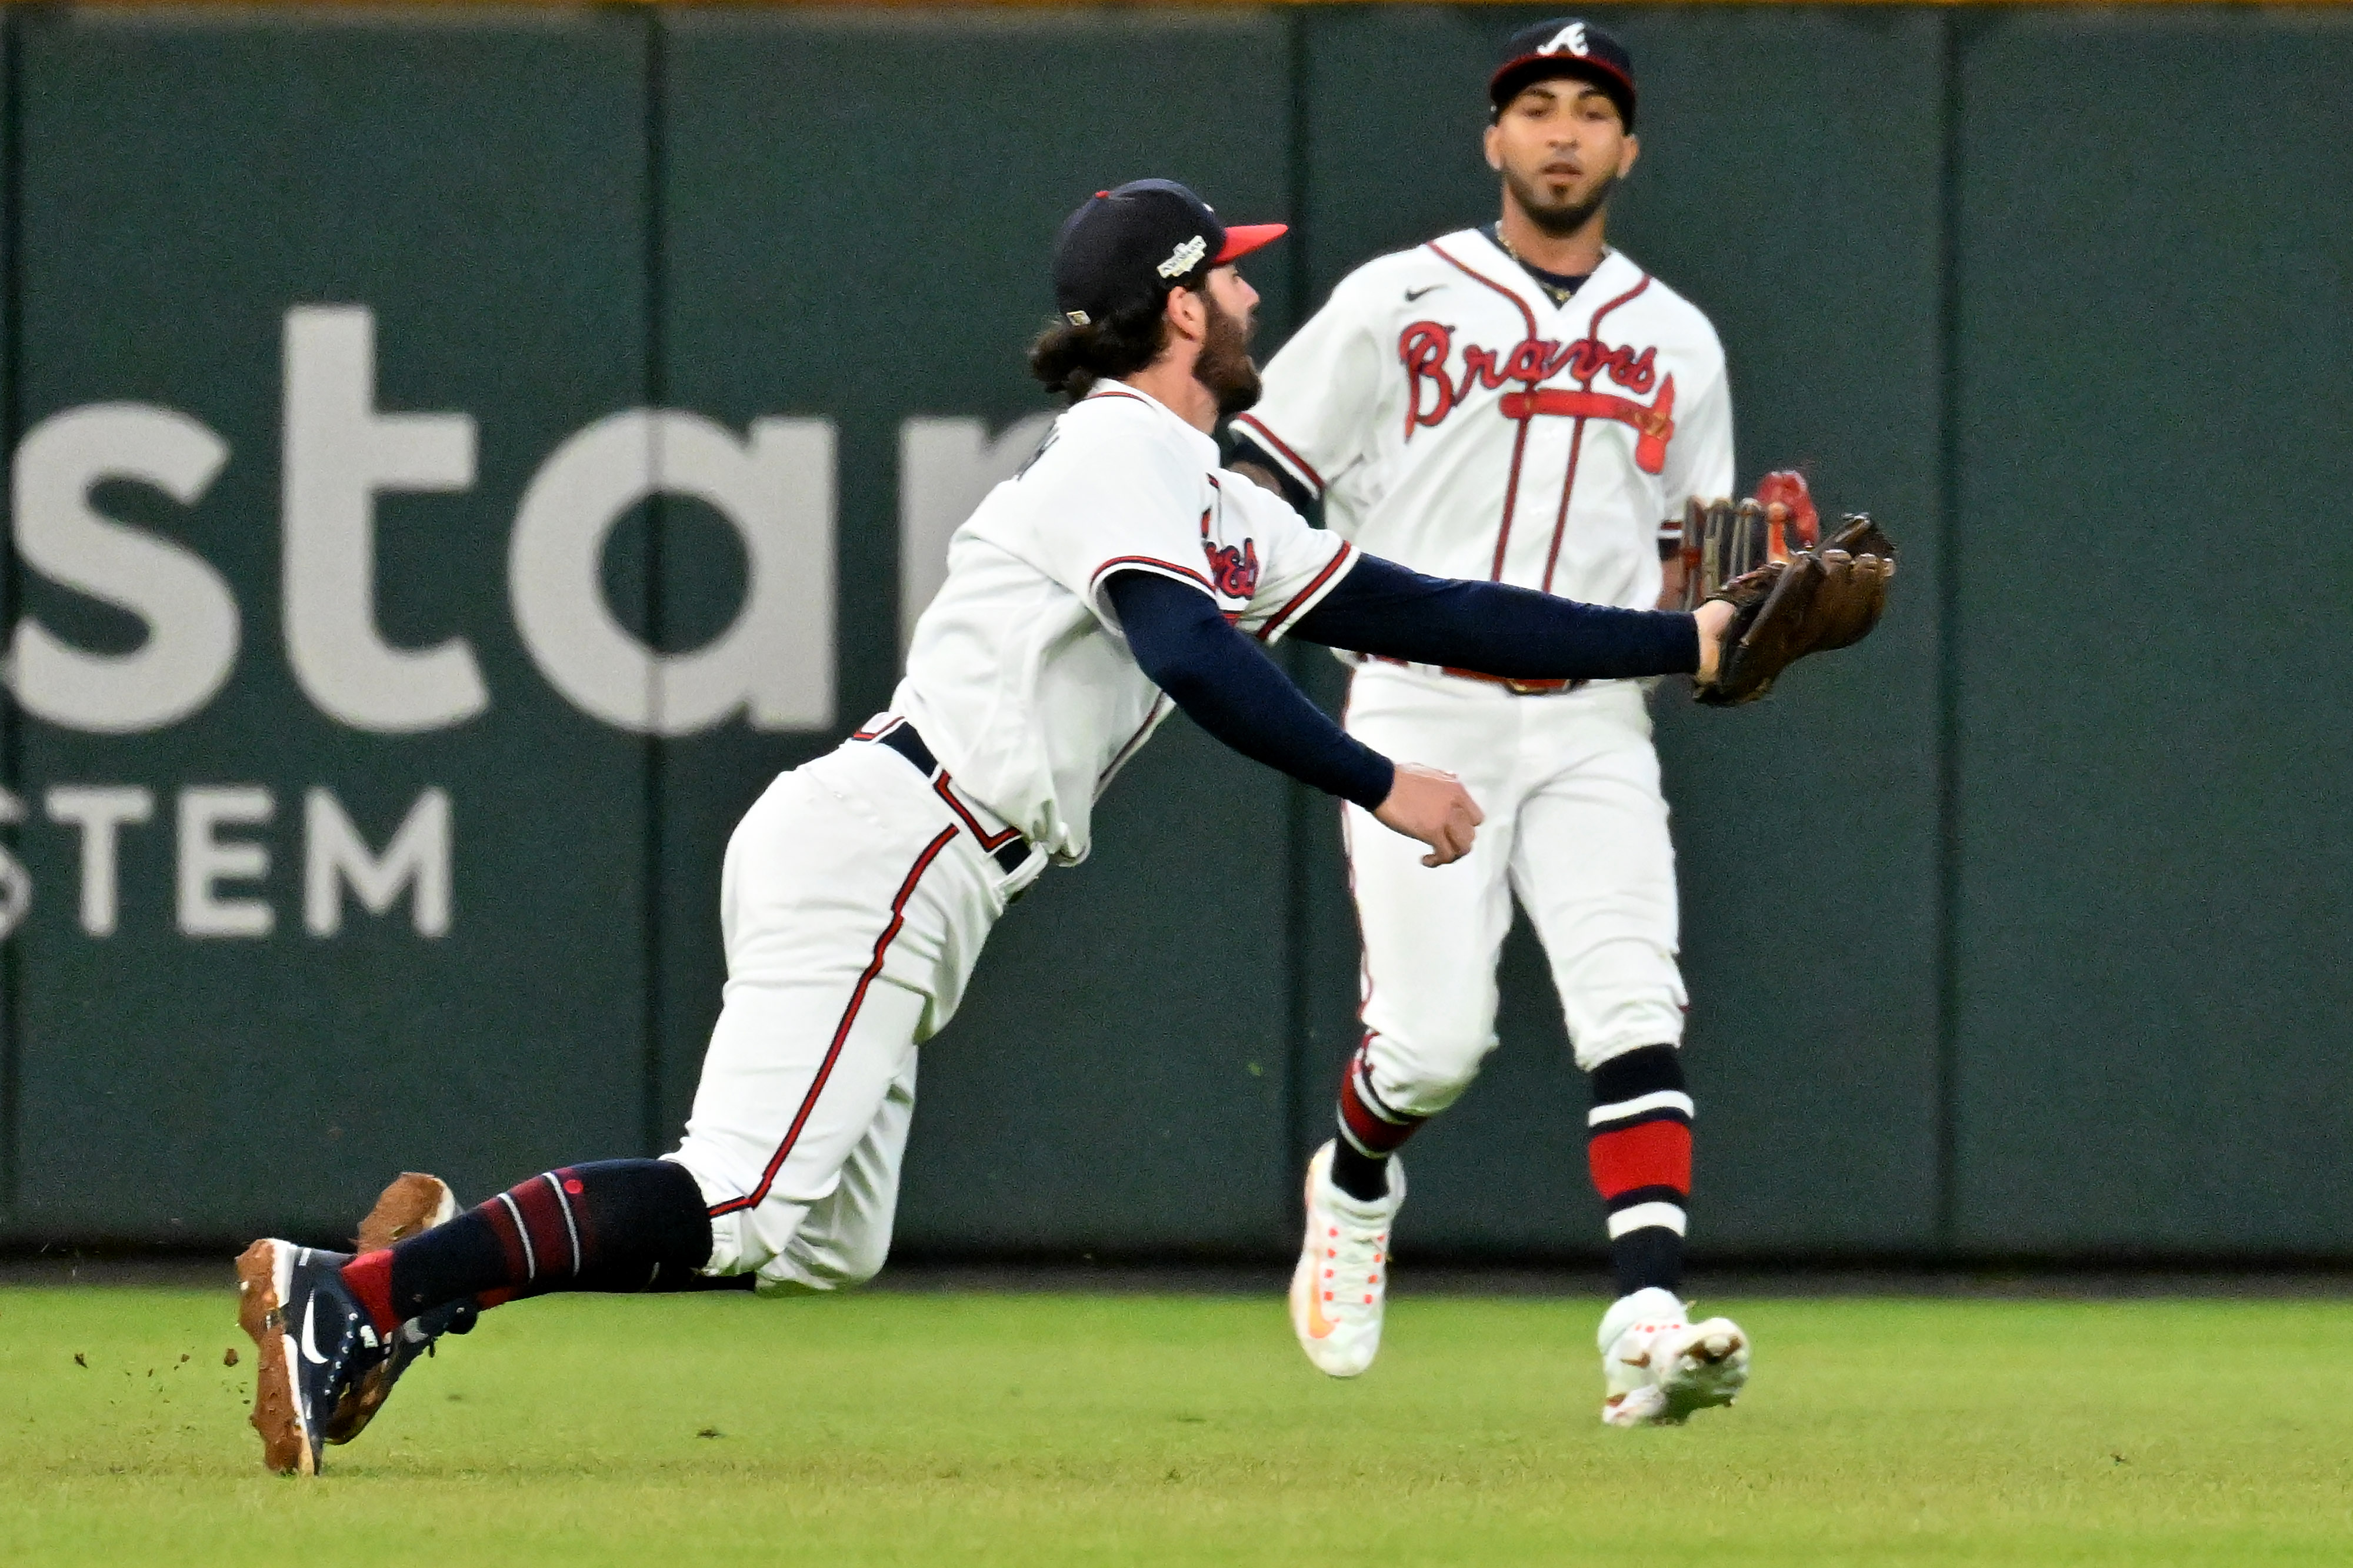 Dansby Swanson of the Atlanta Braves in action against the New York